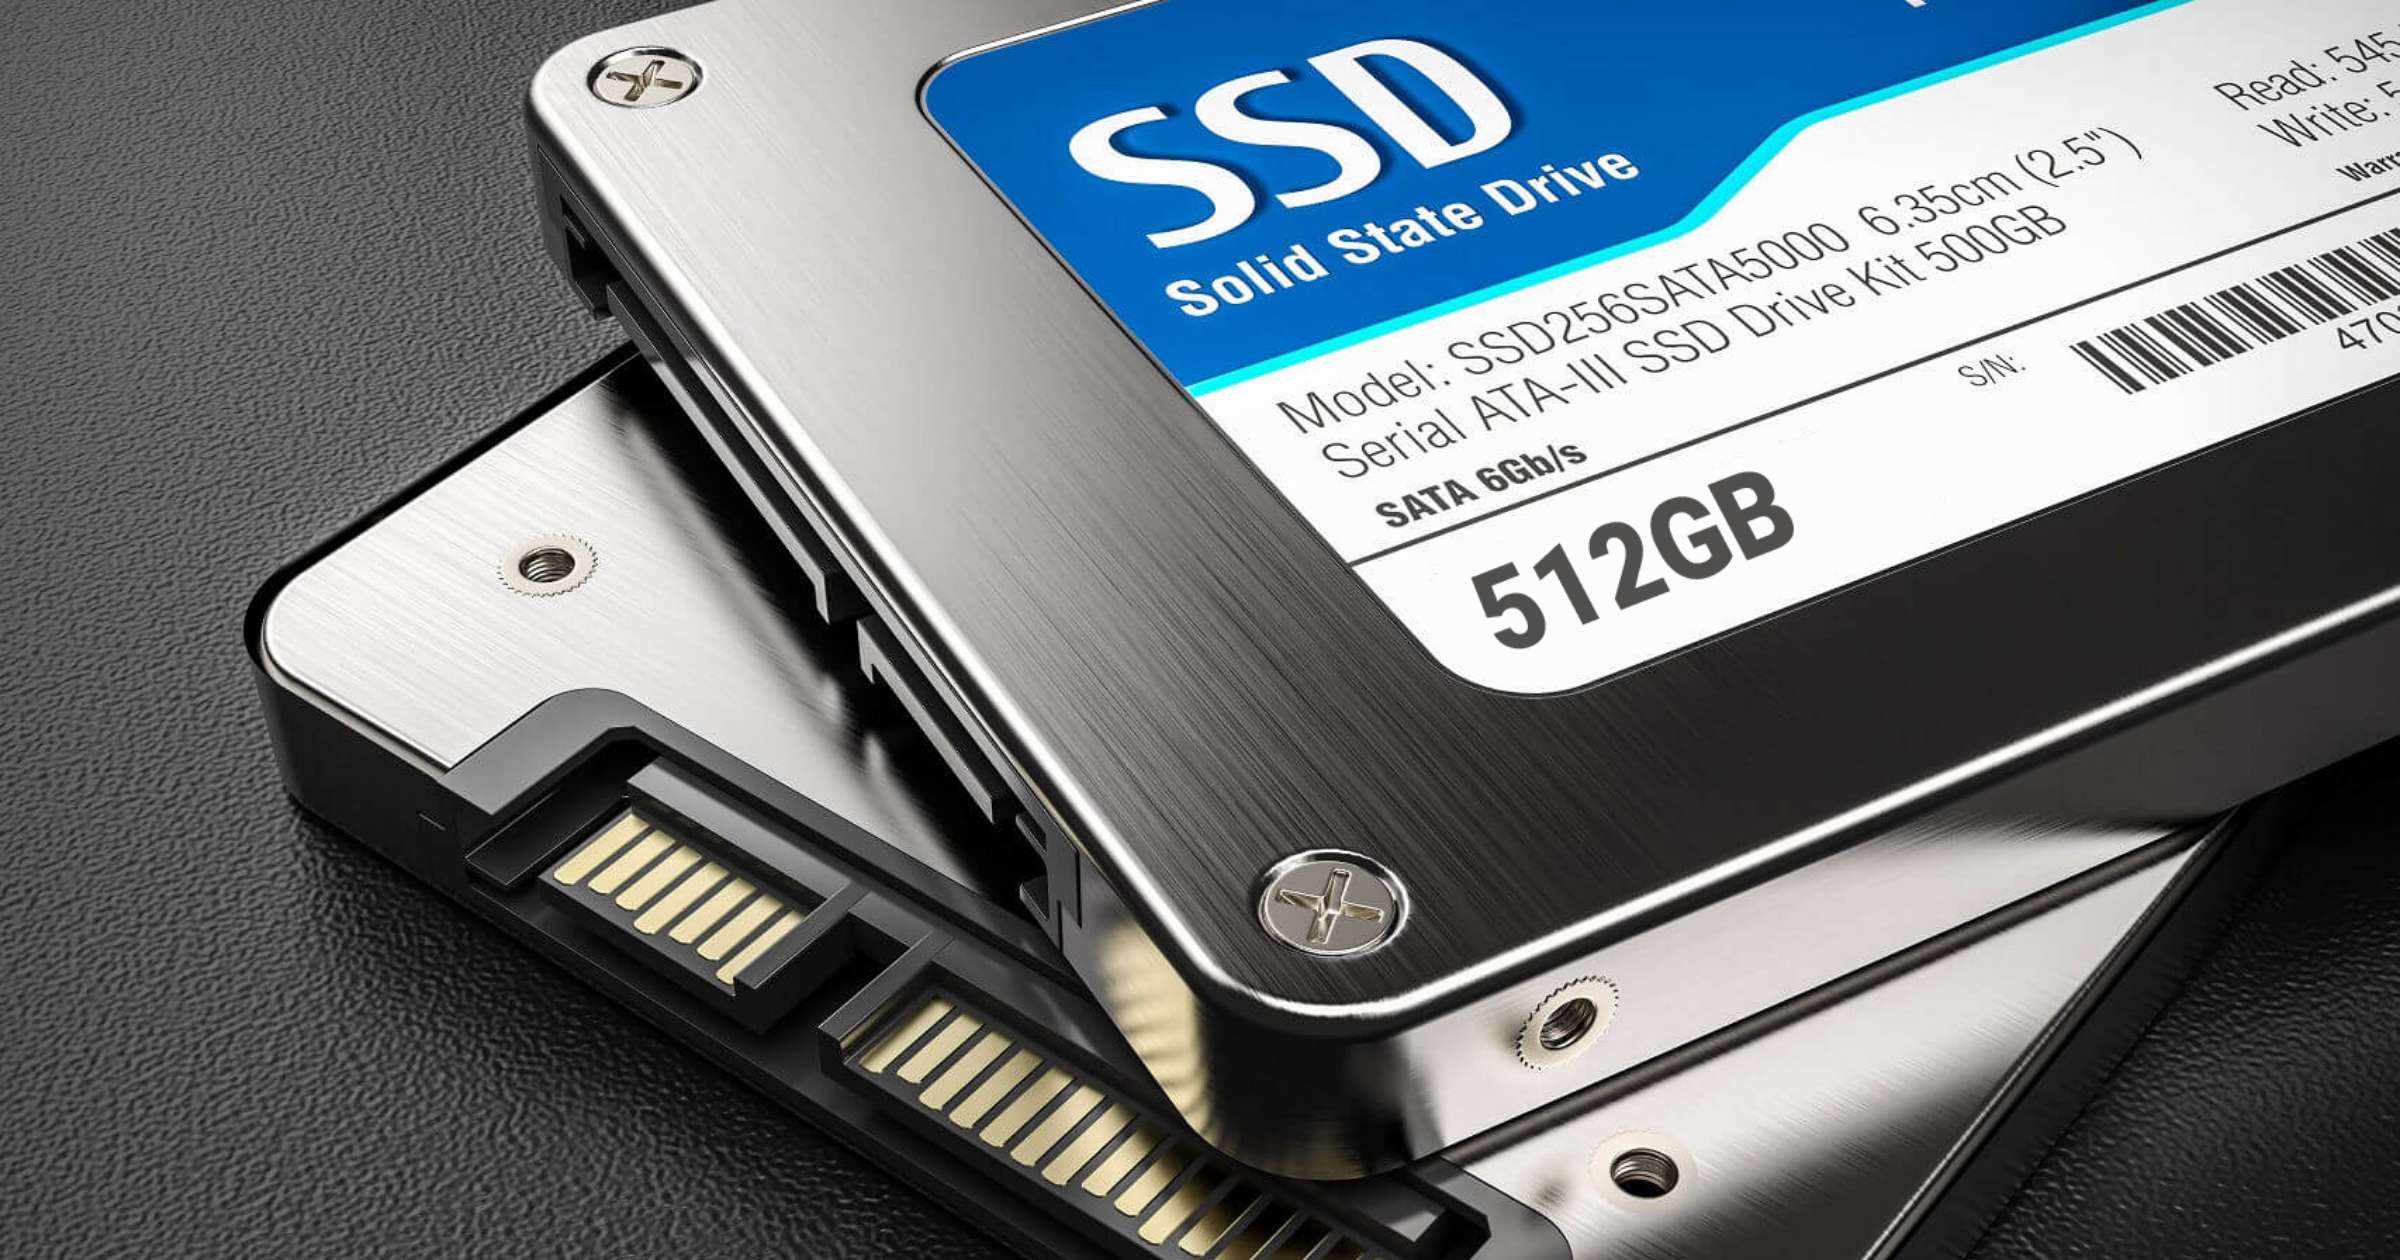 How To Download Games To SSD